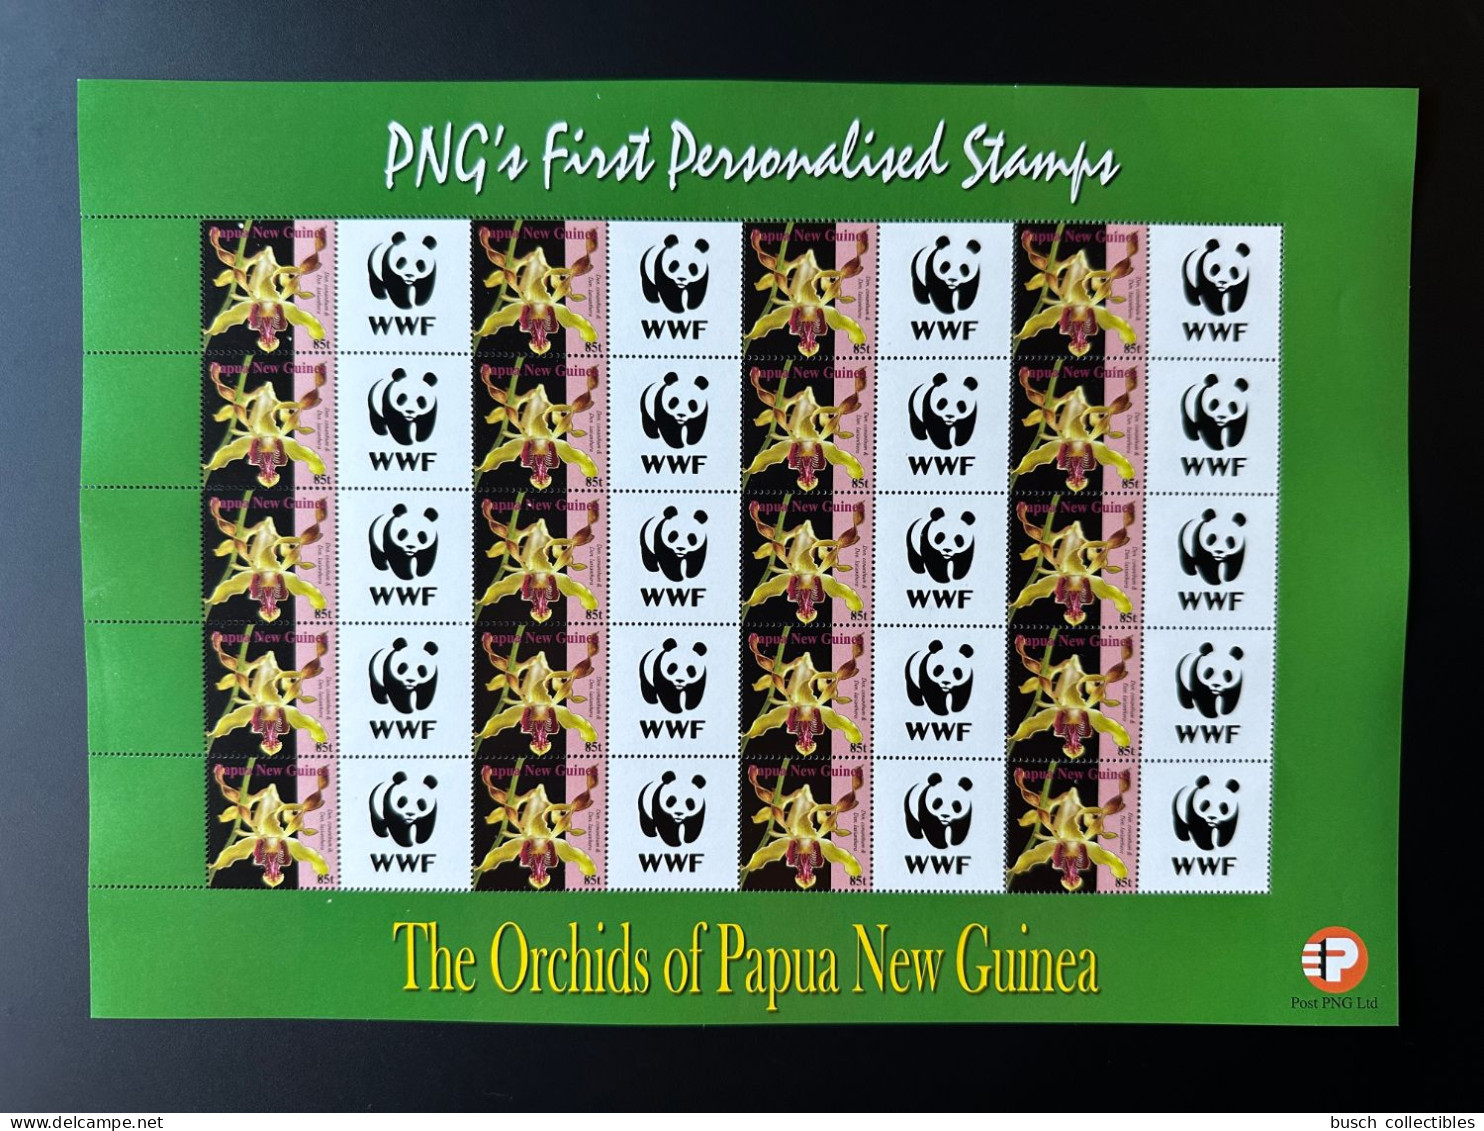 Papua New Guinea PNG 2007 Mi. 1244 Personalized WWF World Wide Fund For Nature Panda Faune Fauna Orchids Flowers - Orchids